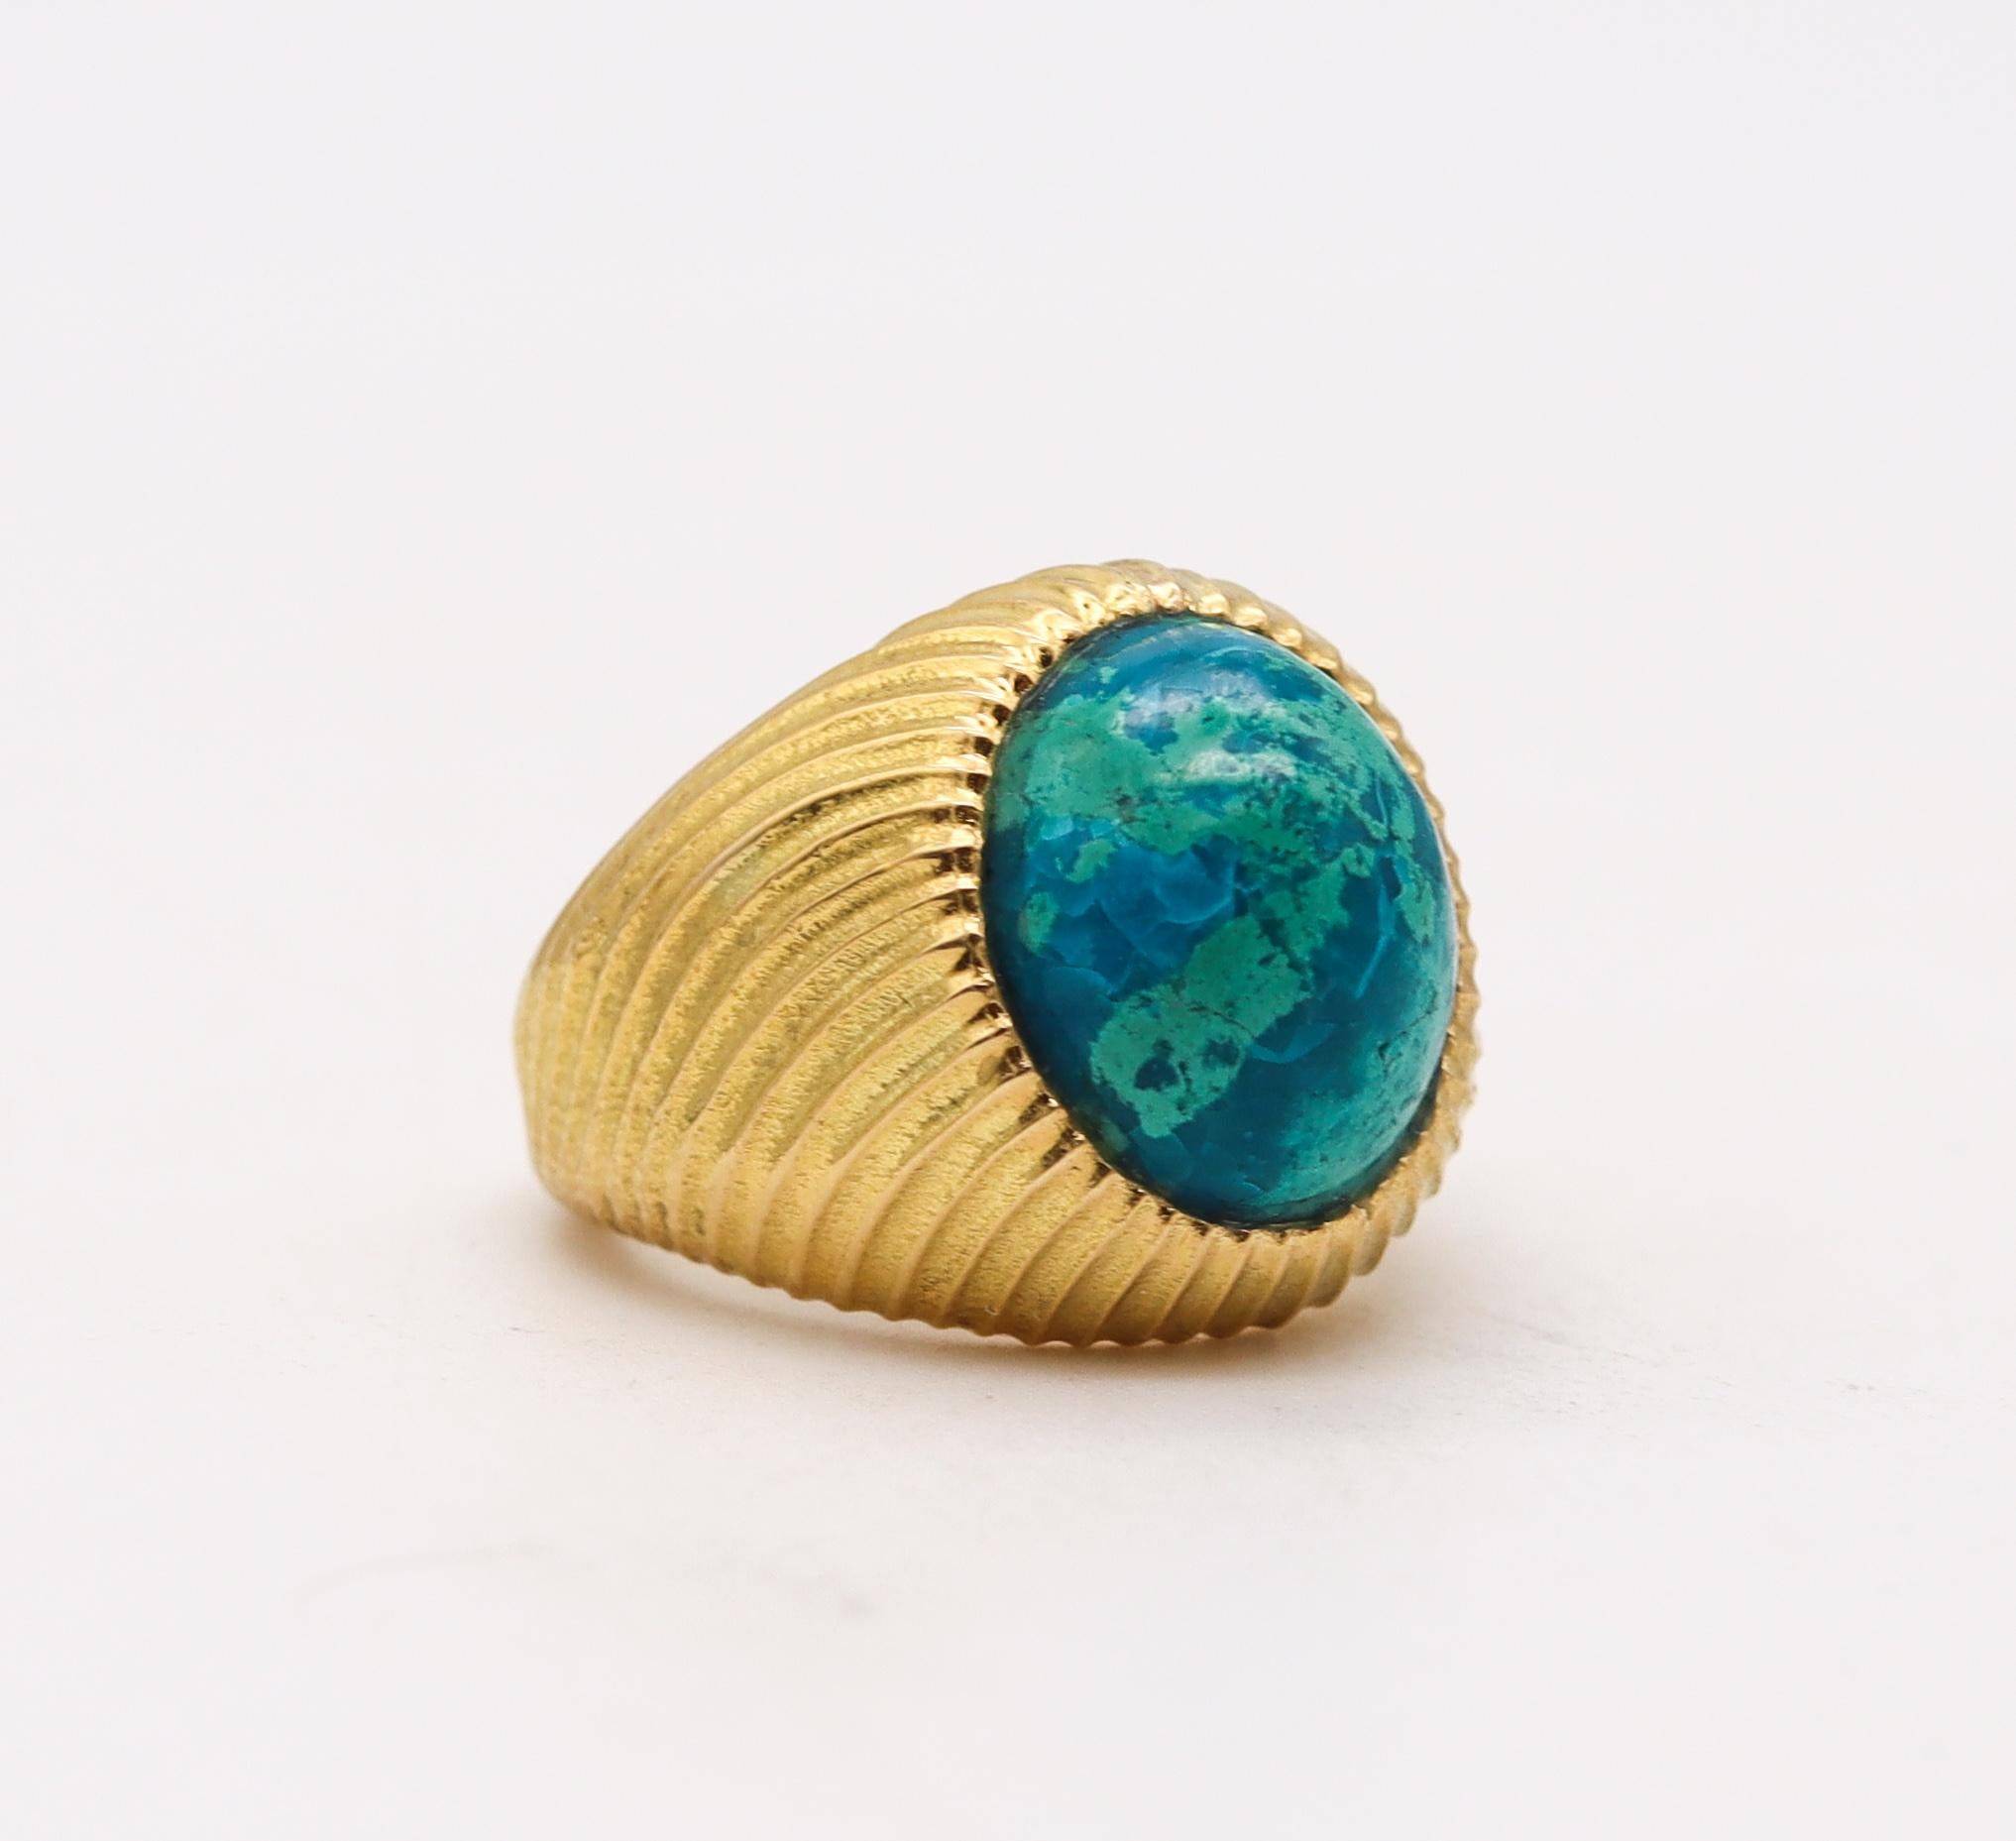 Cocktail ring designed by Jean Schlumberger for Tiffany & Co.

This iconic rare ring is the largest version of the ones created in New York city by Schlumberger at the Tiffany Studios back in the 1970. It was carefully crafted with a micro textured